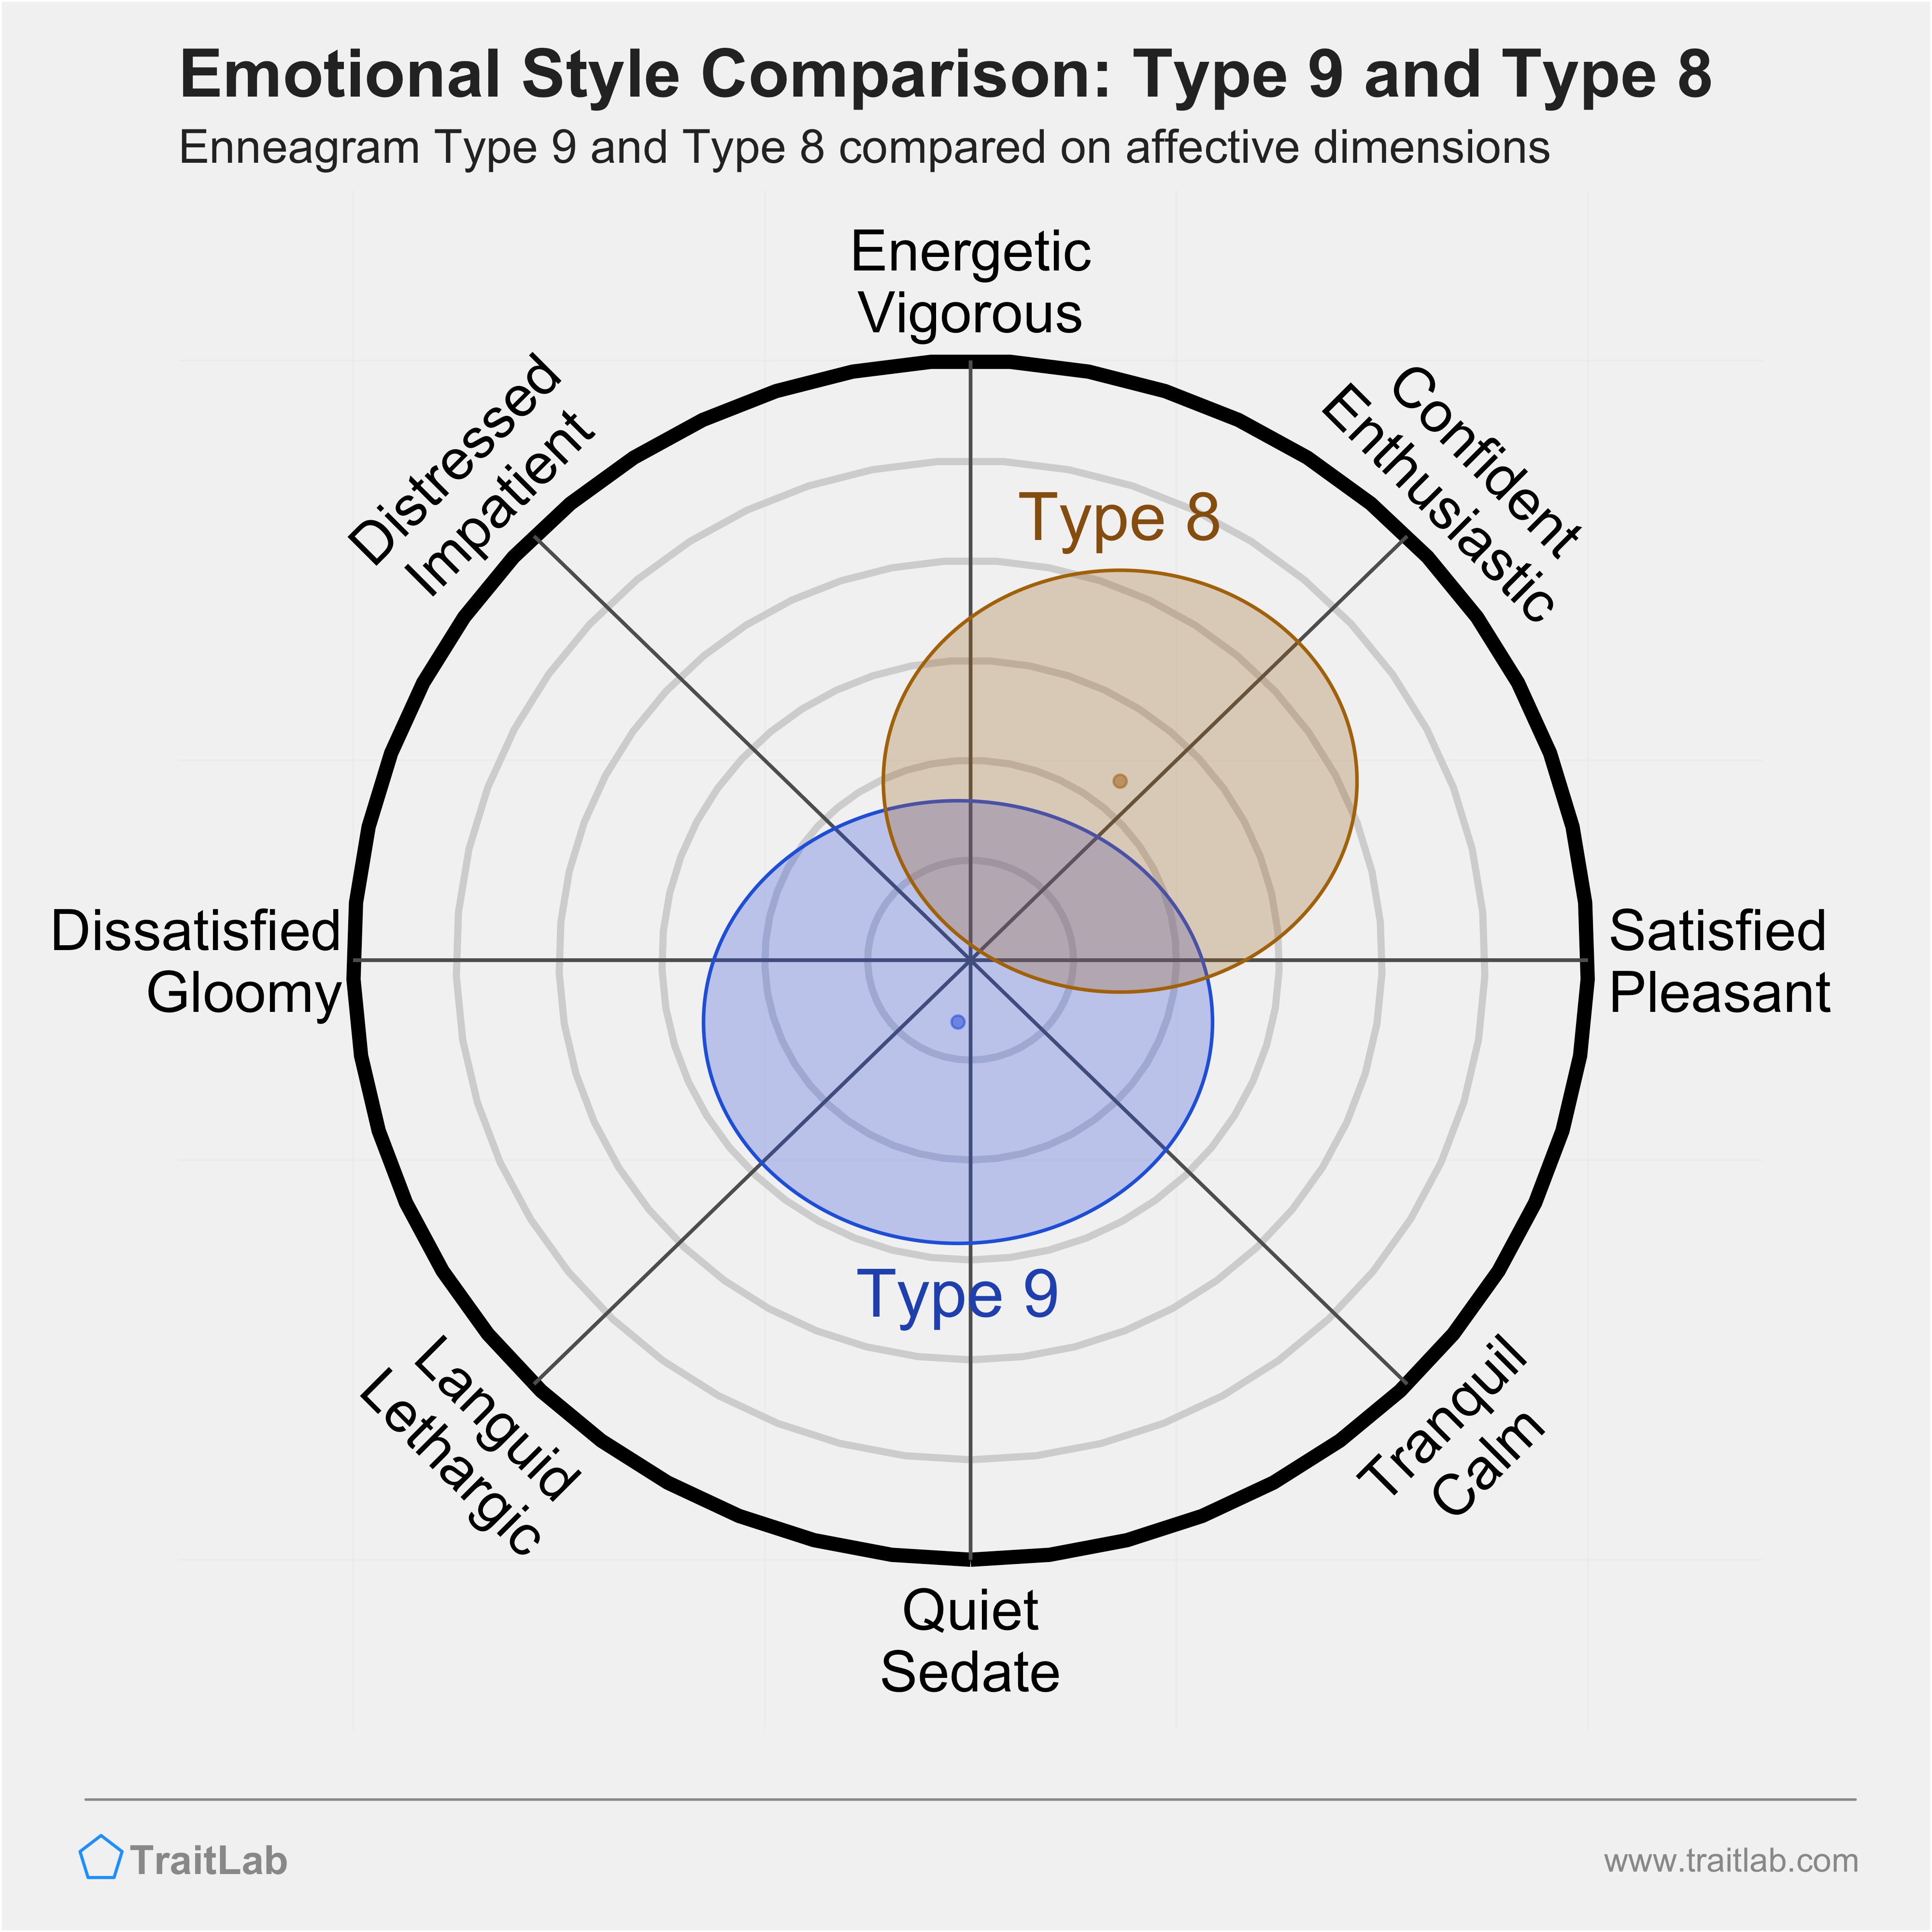 Type 9 and Type 8 comparison across emotional (affective) dimensions